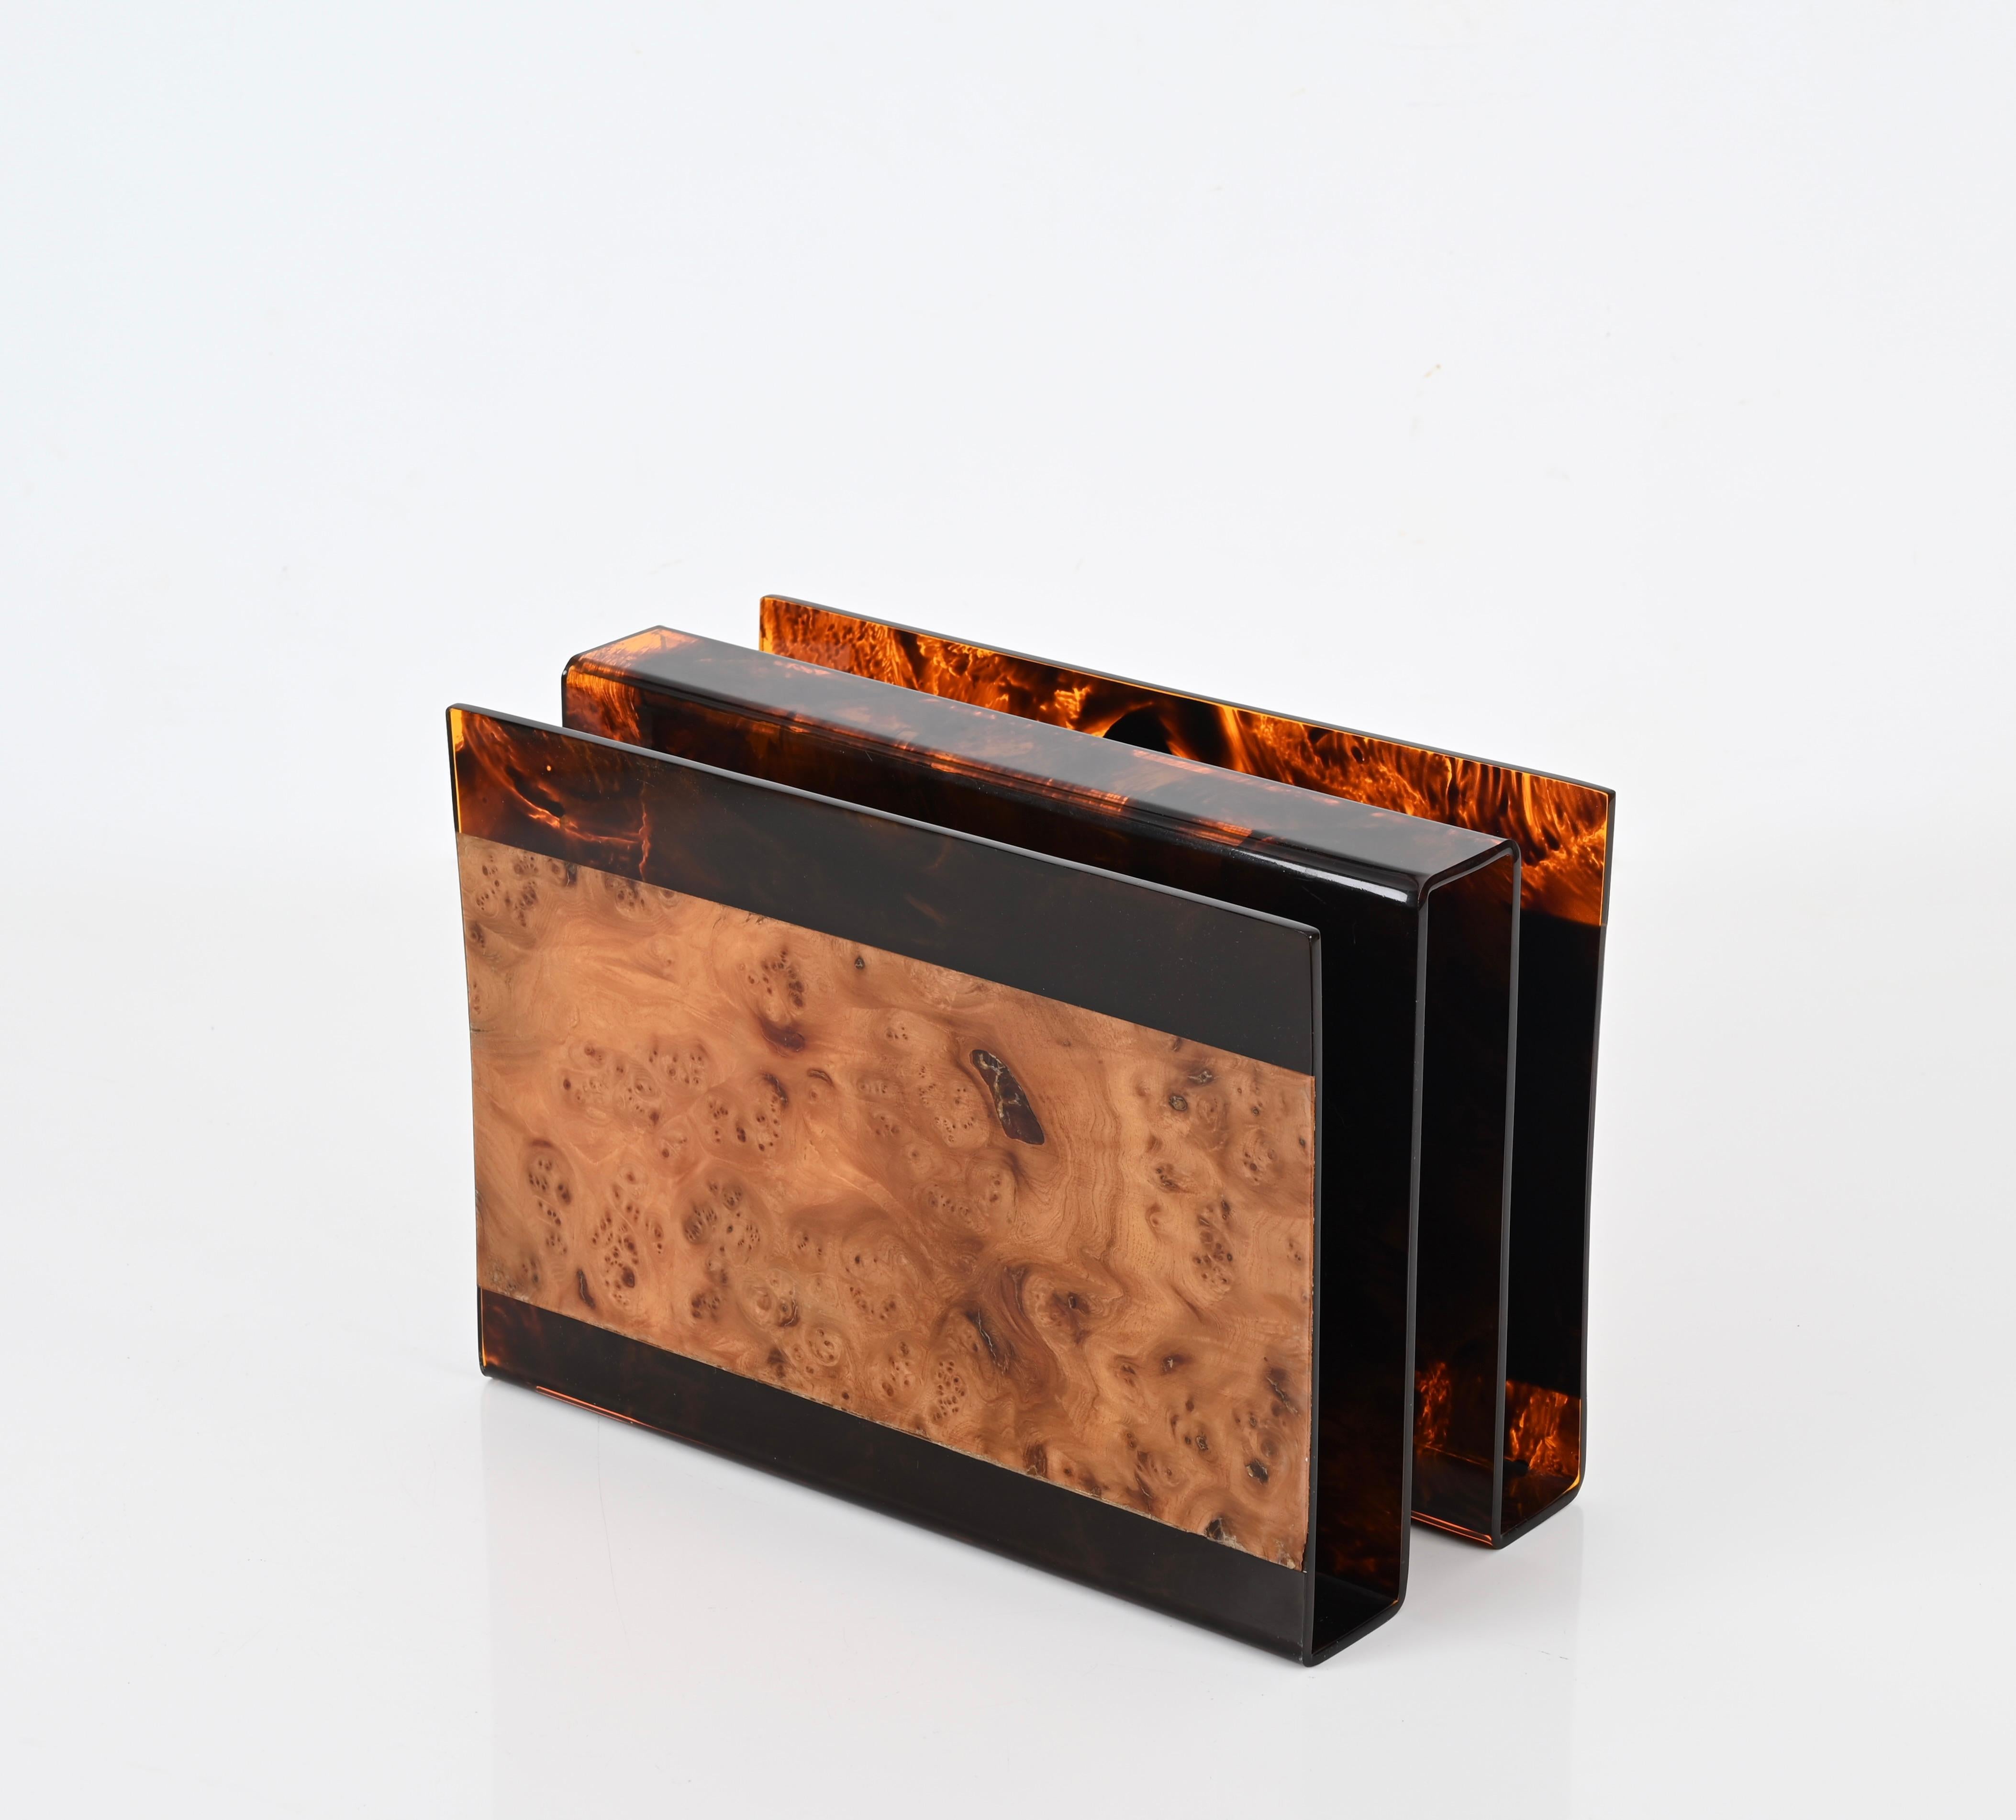 Guzzini Magazine Rack in Tortoiseshell Lucite and Briar, Italy 1970s For Sale 6